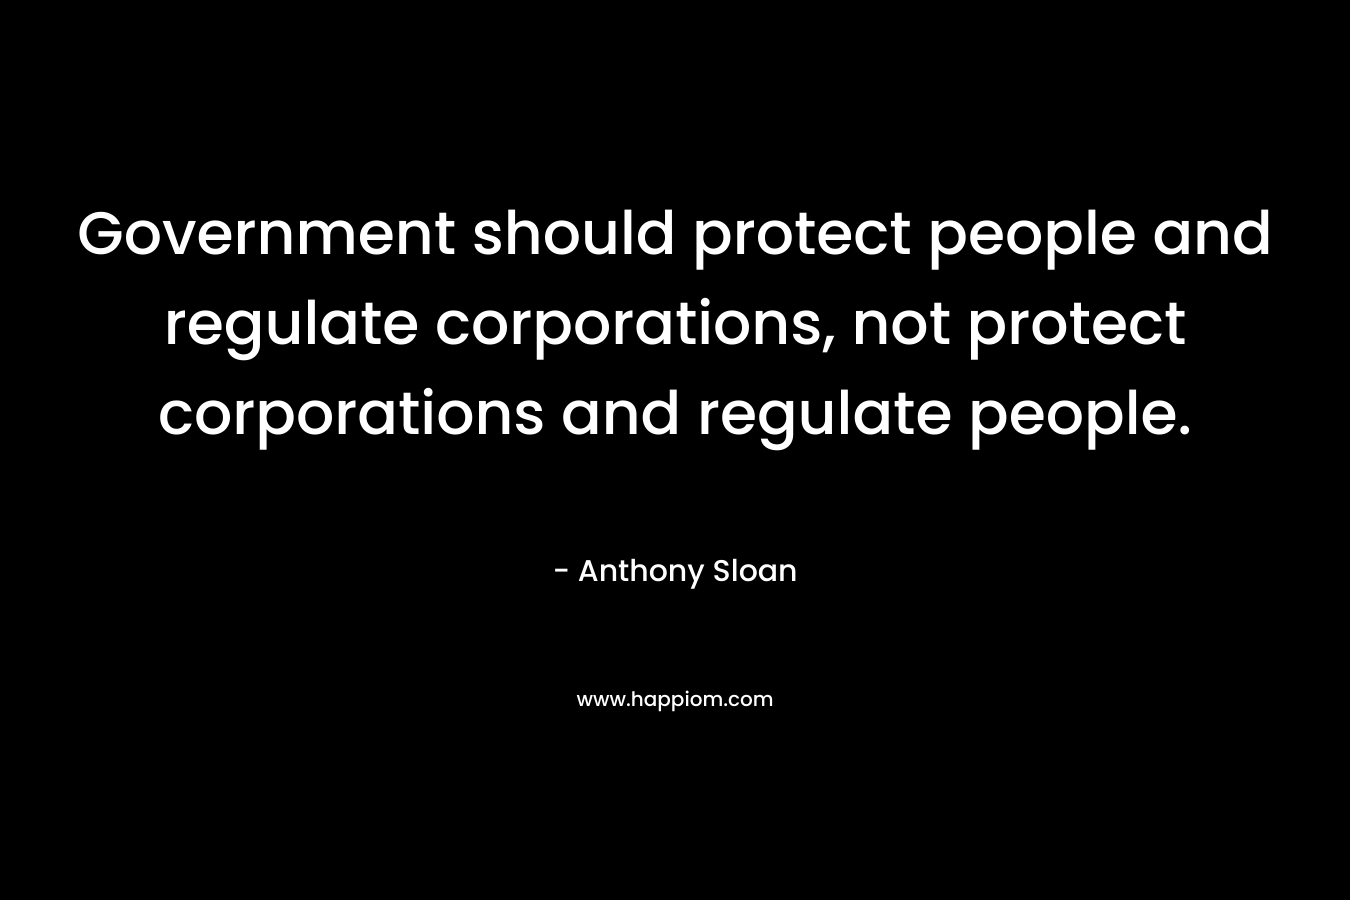 Government should protect people and regulate corporations, not protect corporations and regulate people. – Anthony Sloan